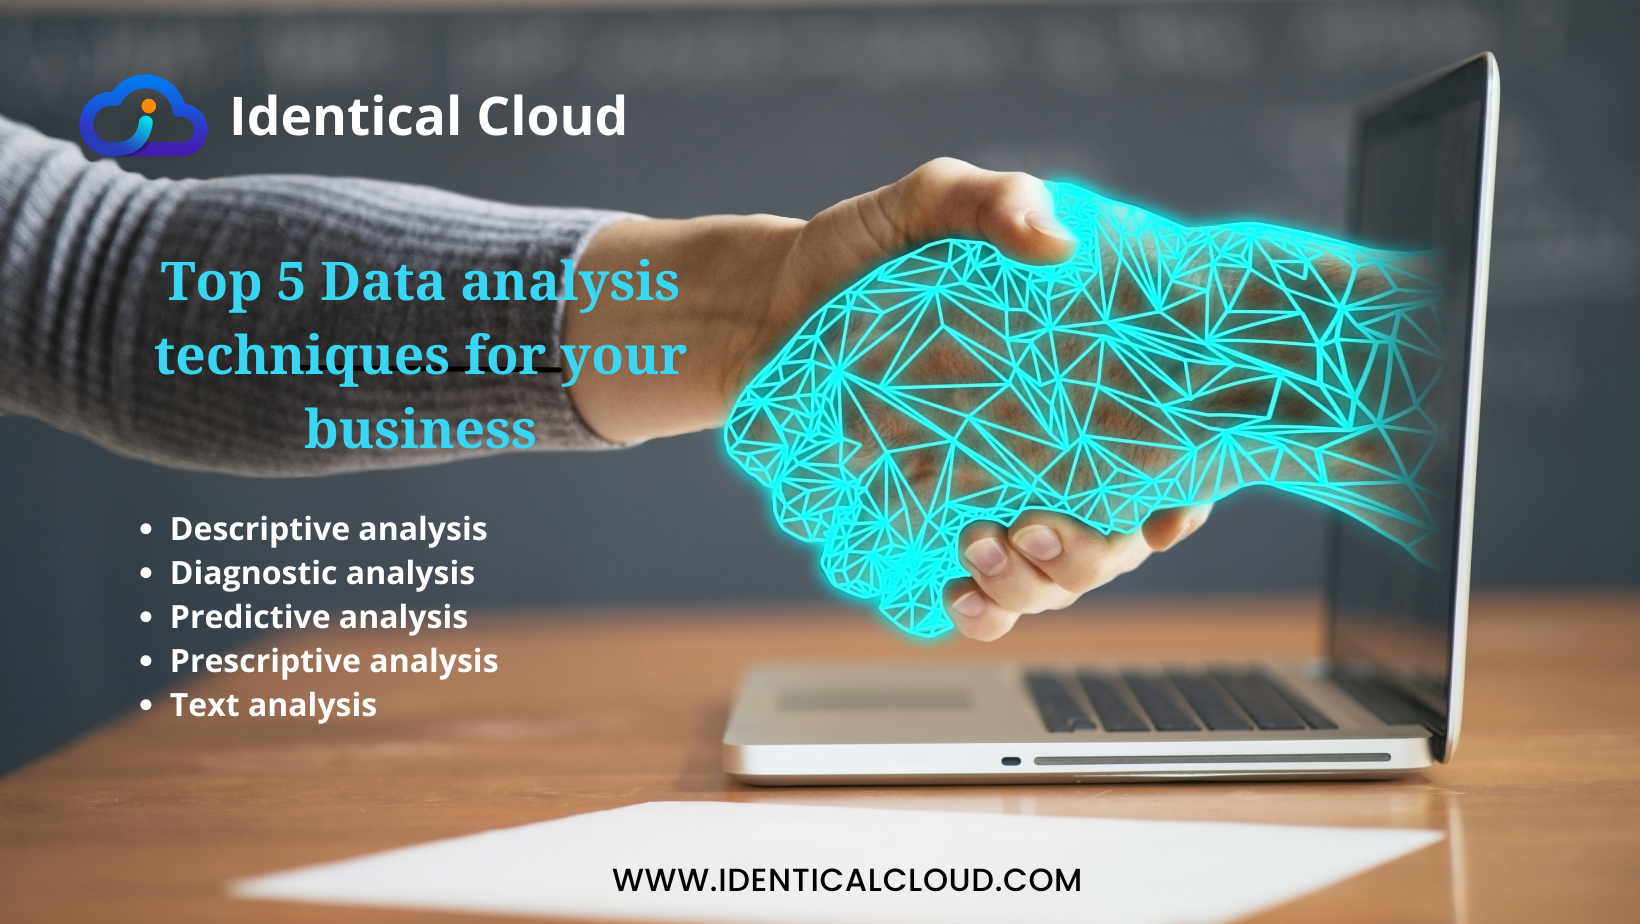 Top 5 Data analysis techniques for your business - identicalcloud.com